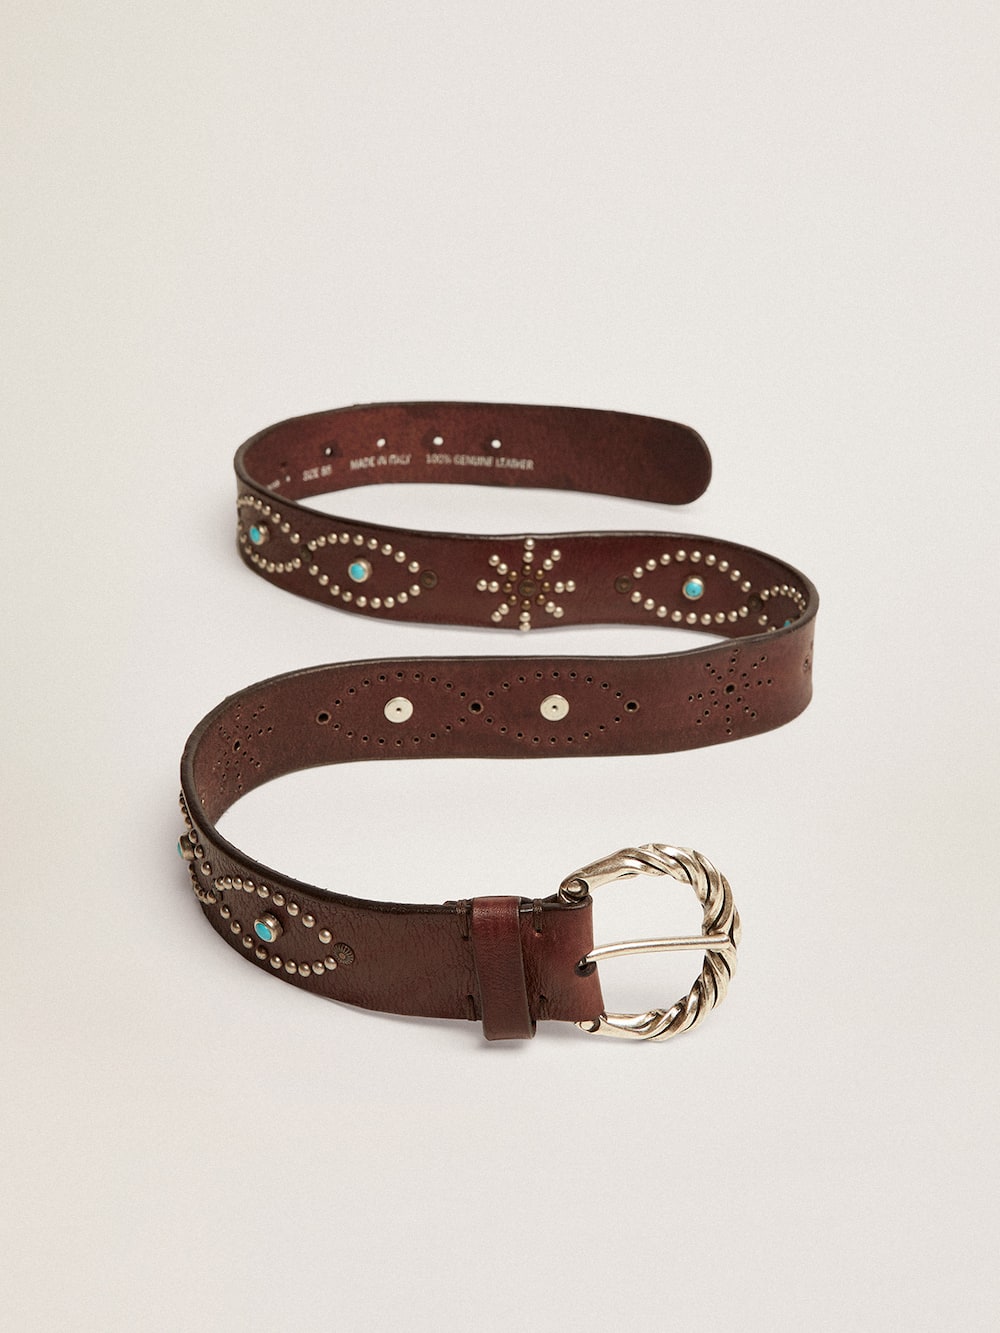 Golden Goose - Women's belt in dark brown leather with colored studs in 